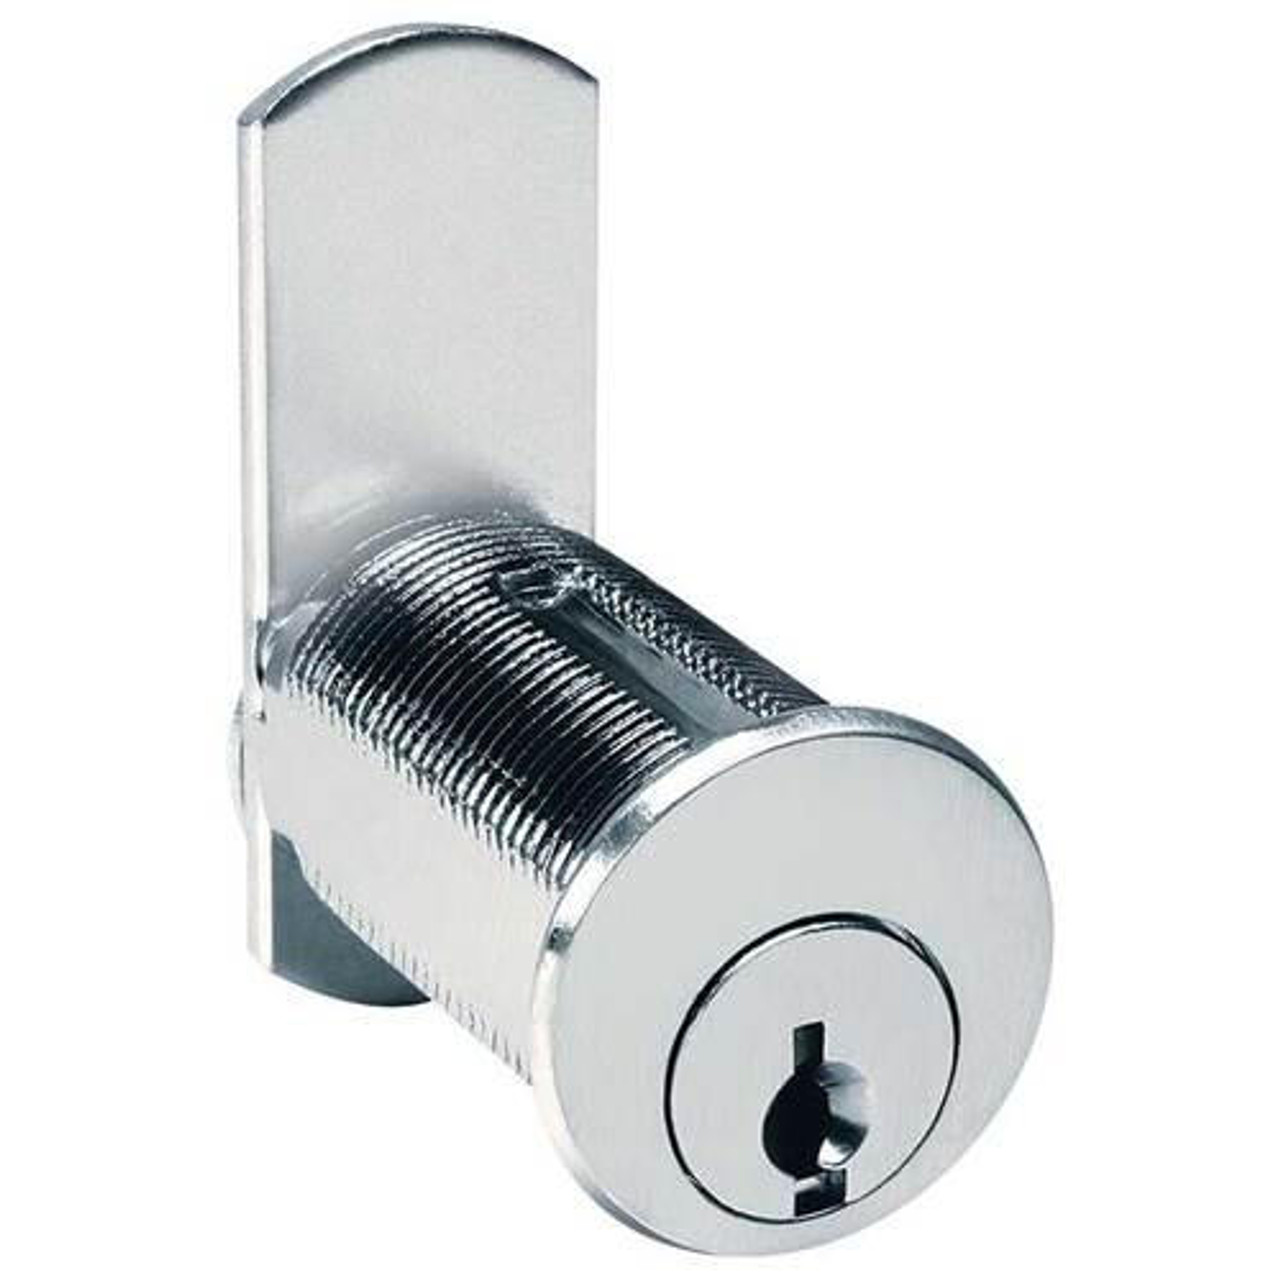 Compx Security Products Compx C8101 Cylinder Pin Tumbler Cam lock 15/16 Cylinder Length for 5/8" Maximum Material Thickness 